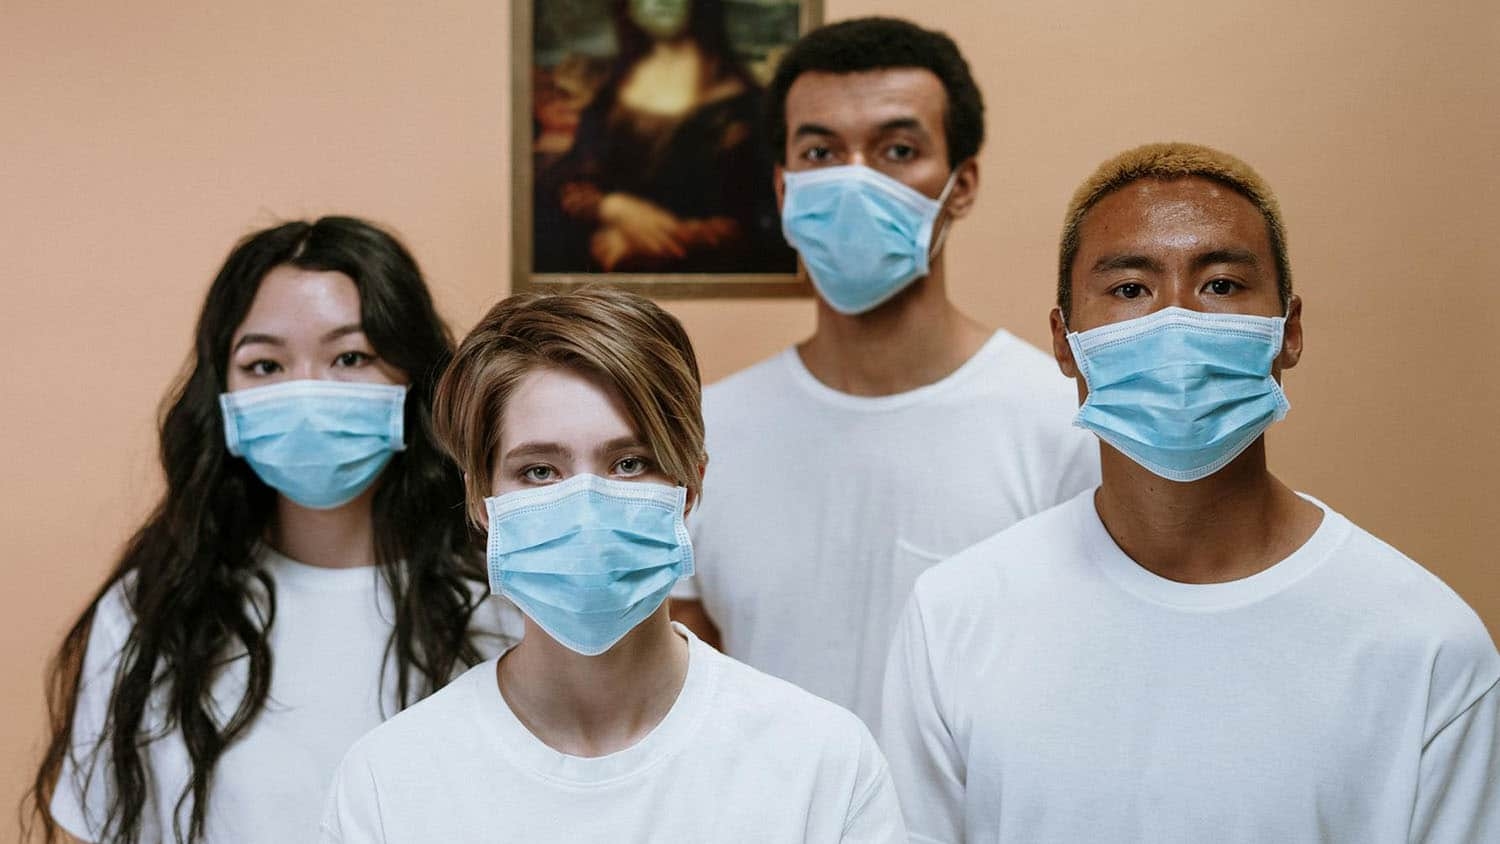 four young adults of different racial backgrounds stand together wearing masks that cover their nose and mouth.